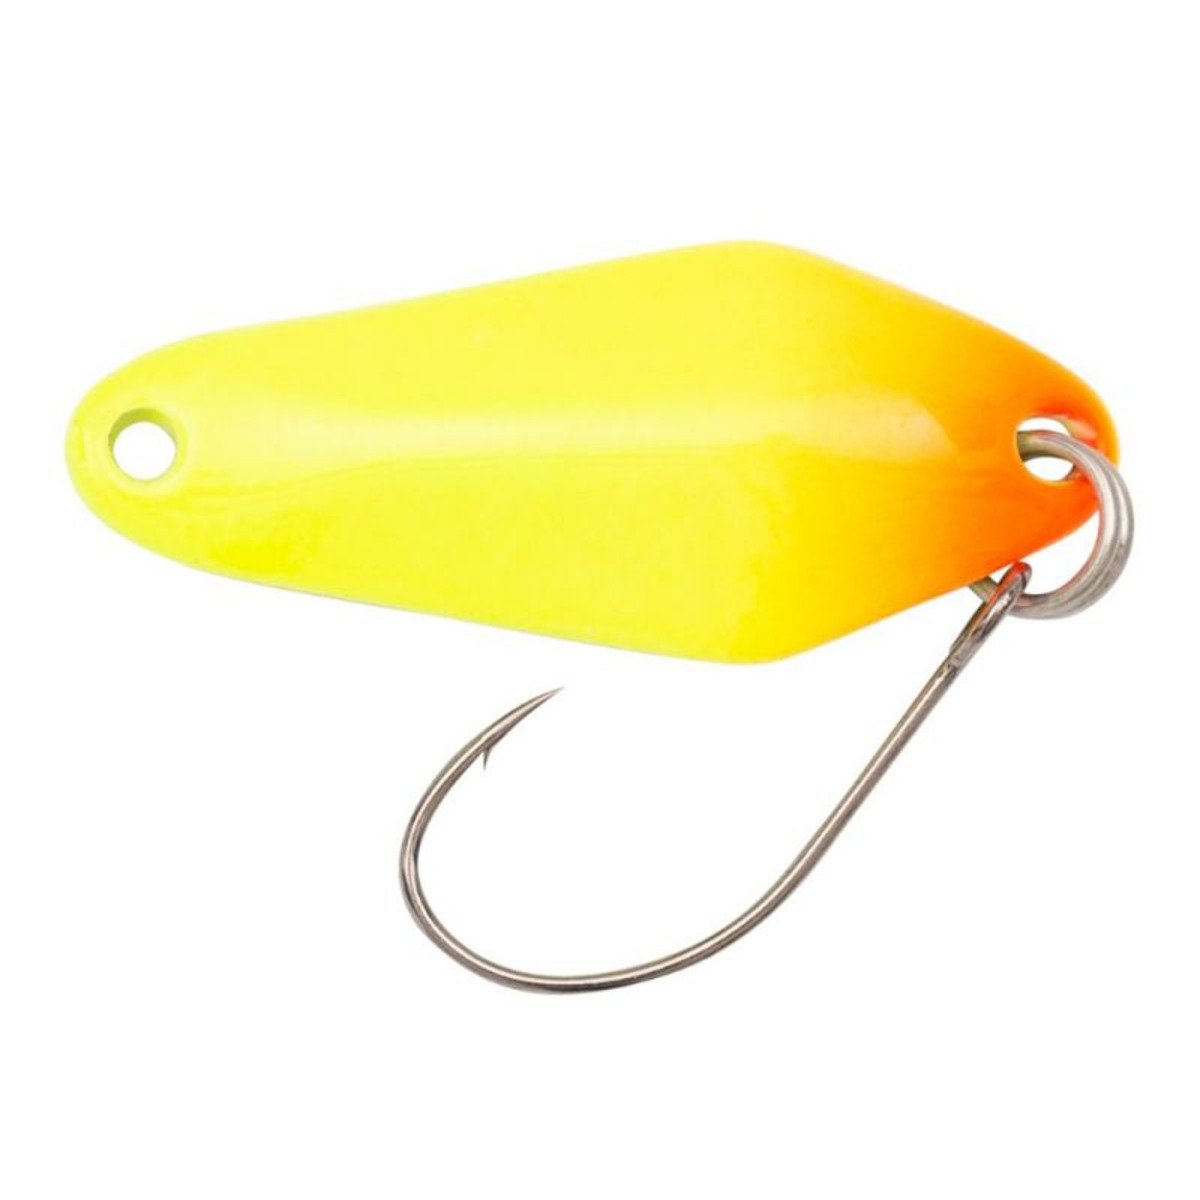 Berkley Area Game Spoons Chisai - 1.5 g - 2.00 cm - Orange Tip-Chartreuse-Gold